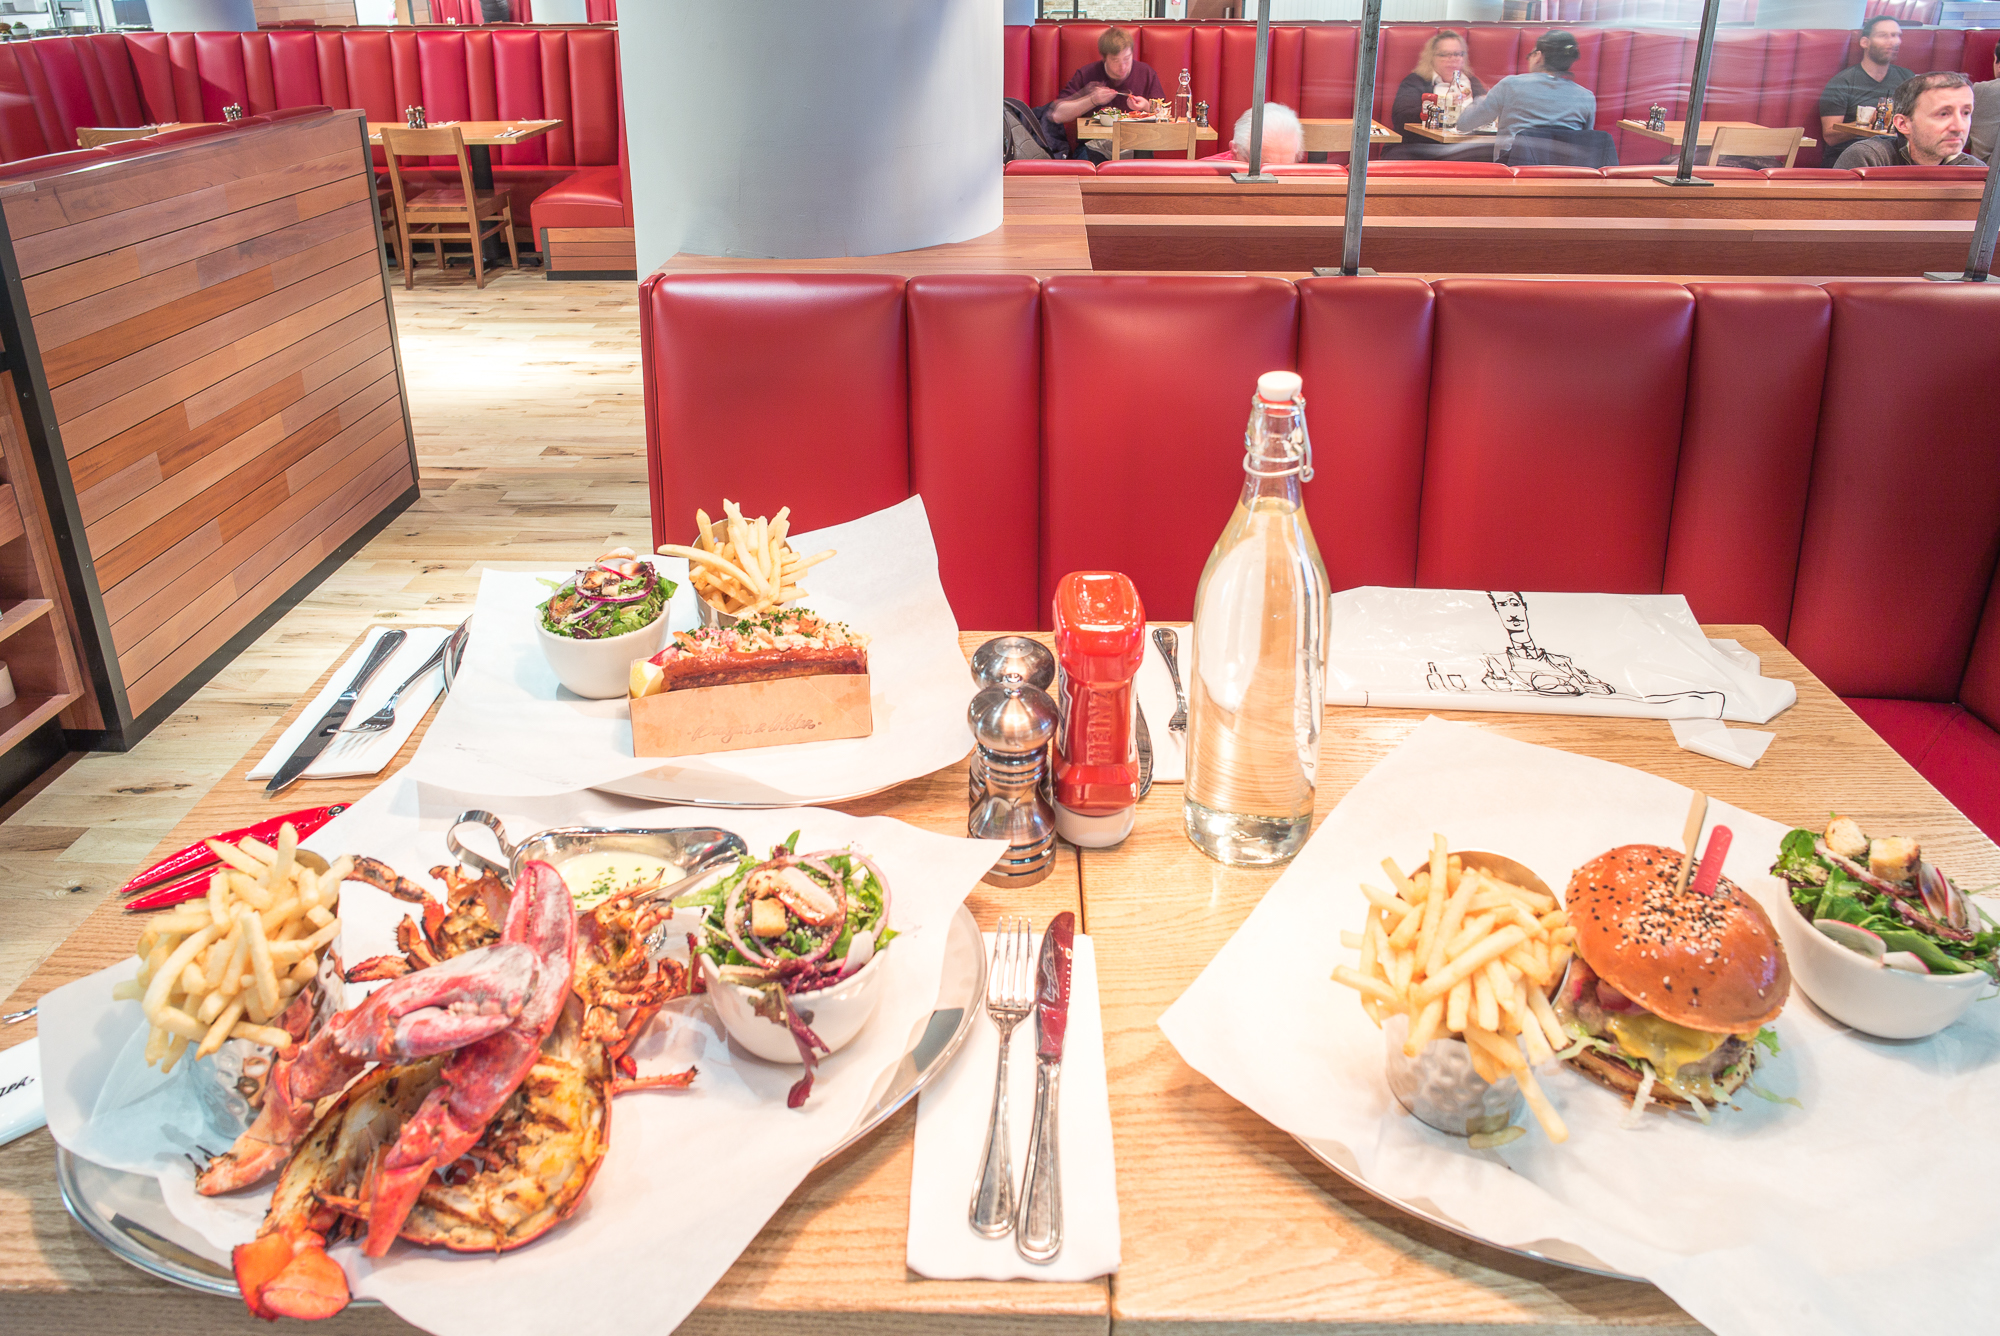 Burger & Lobster Offers Fantastic and Affordable Food in NYC